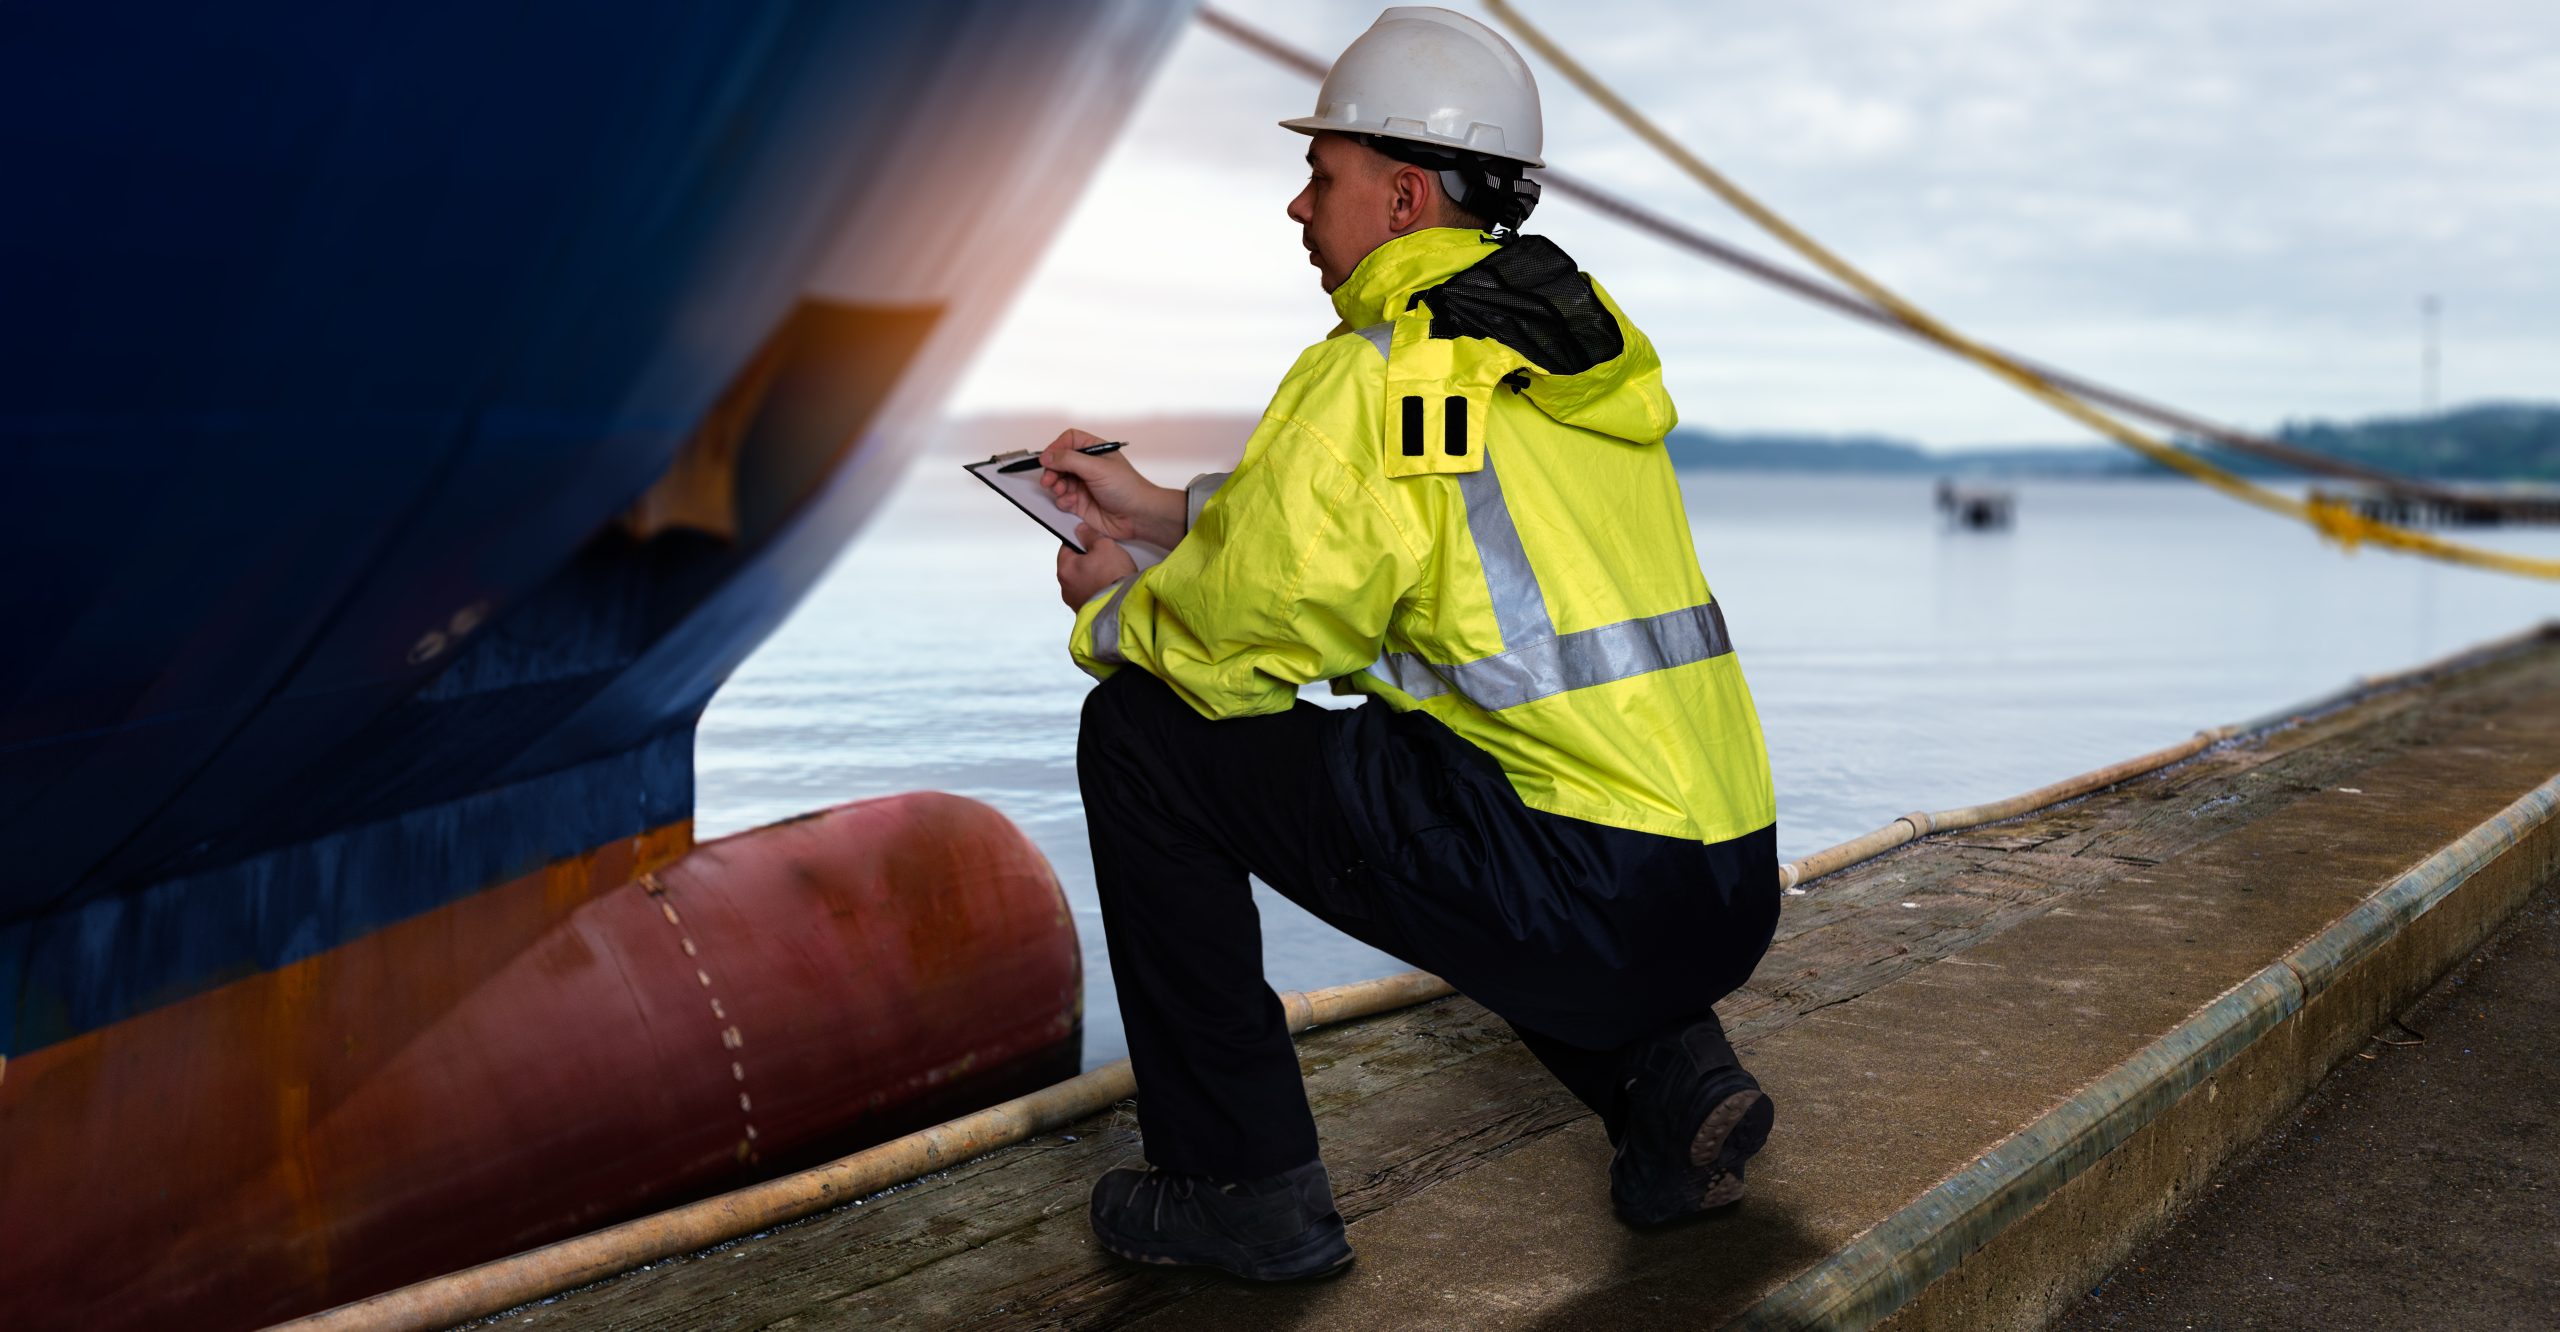 Ship supervisor engineer inspector stands at the dockside in a port. Wearing safety helmet and yellow vest